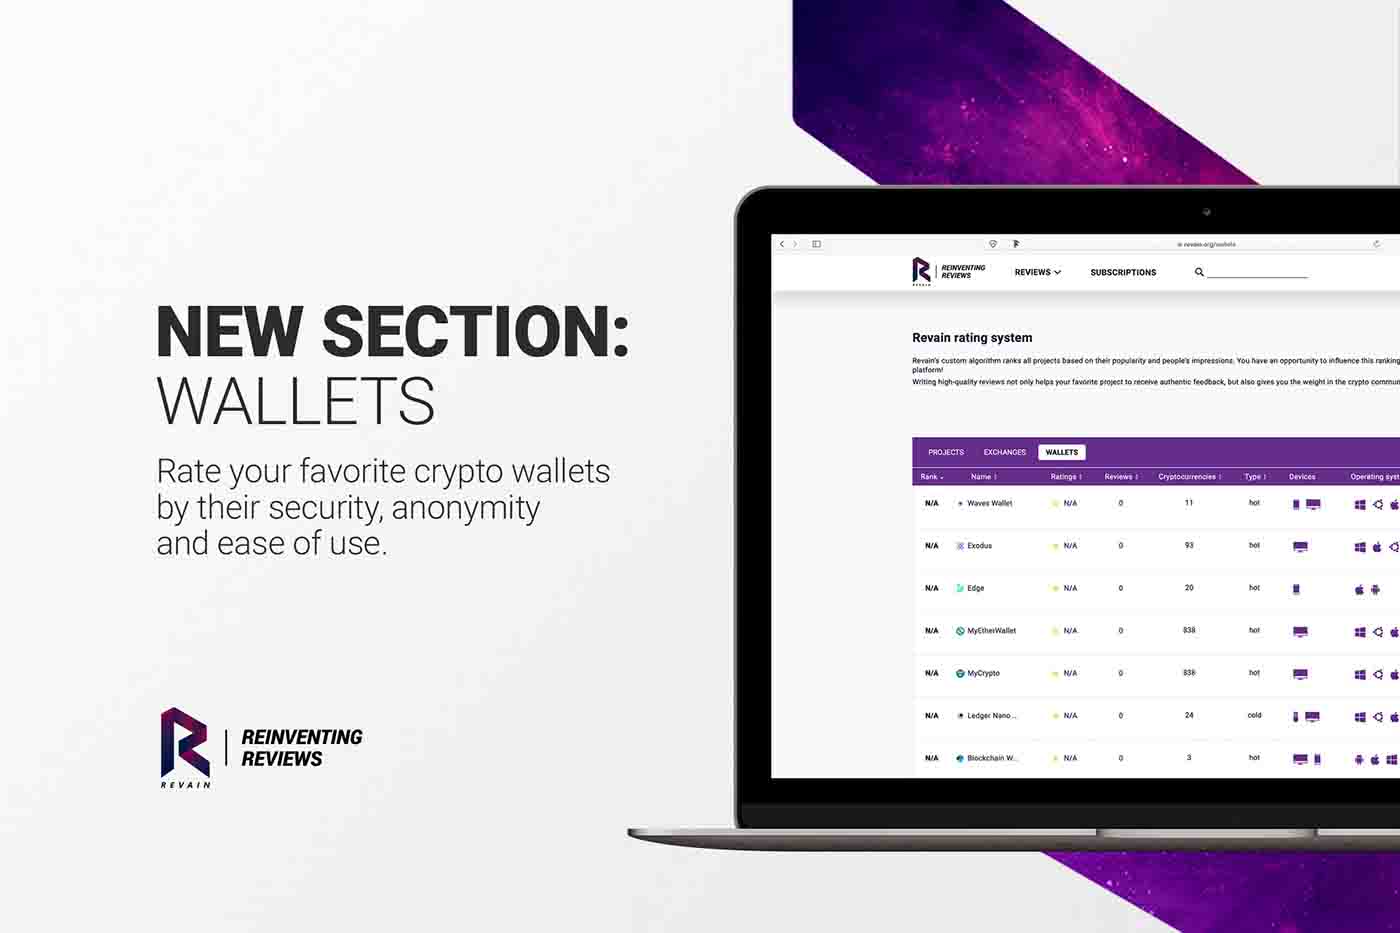 Article Crypto Wallets category is now available on Revain platform